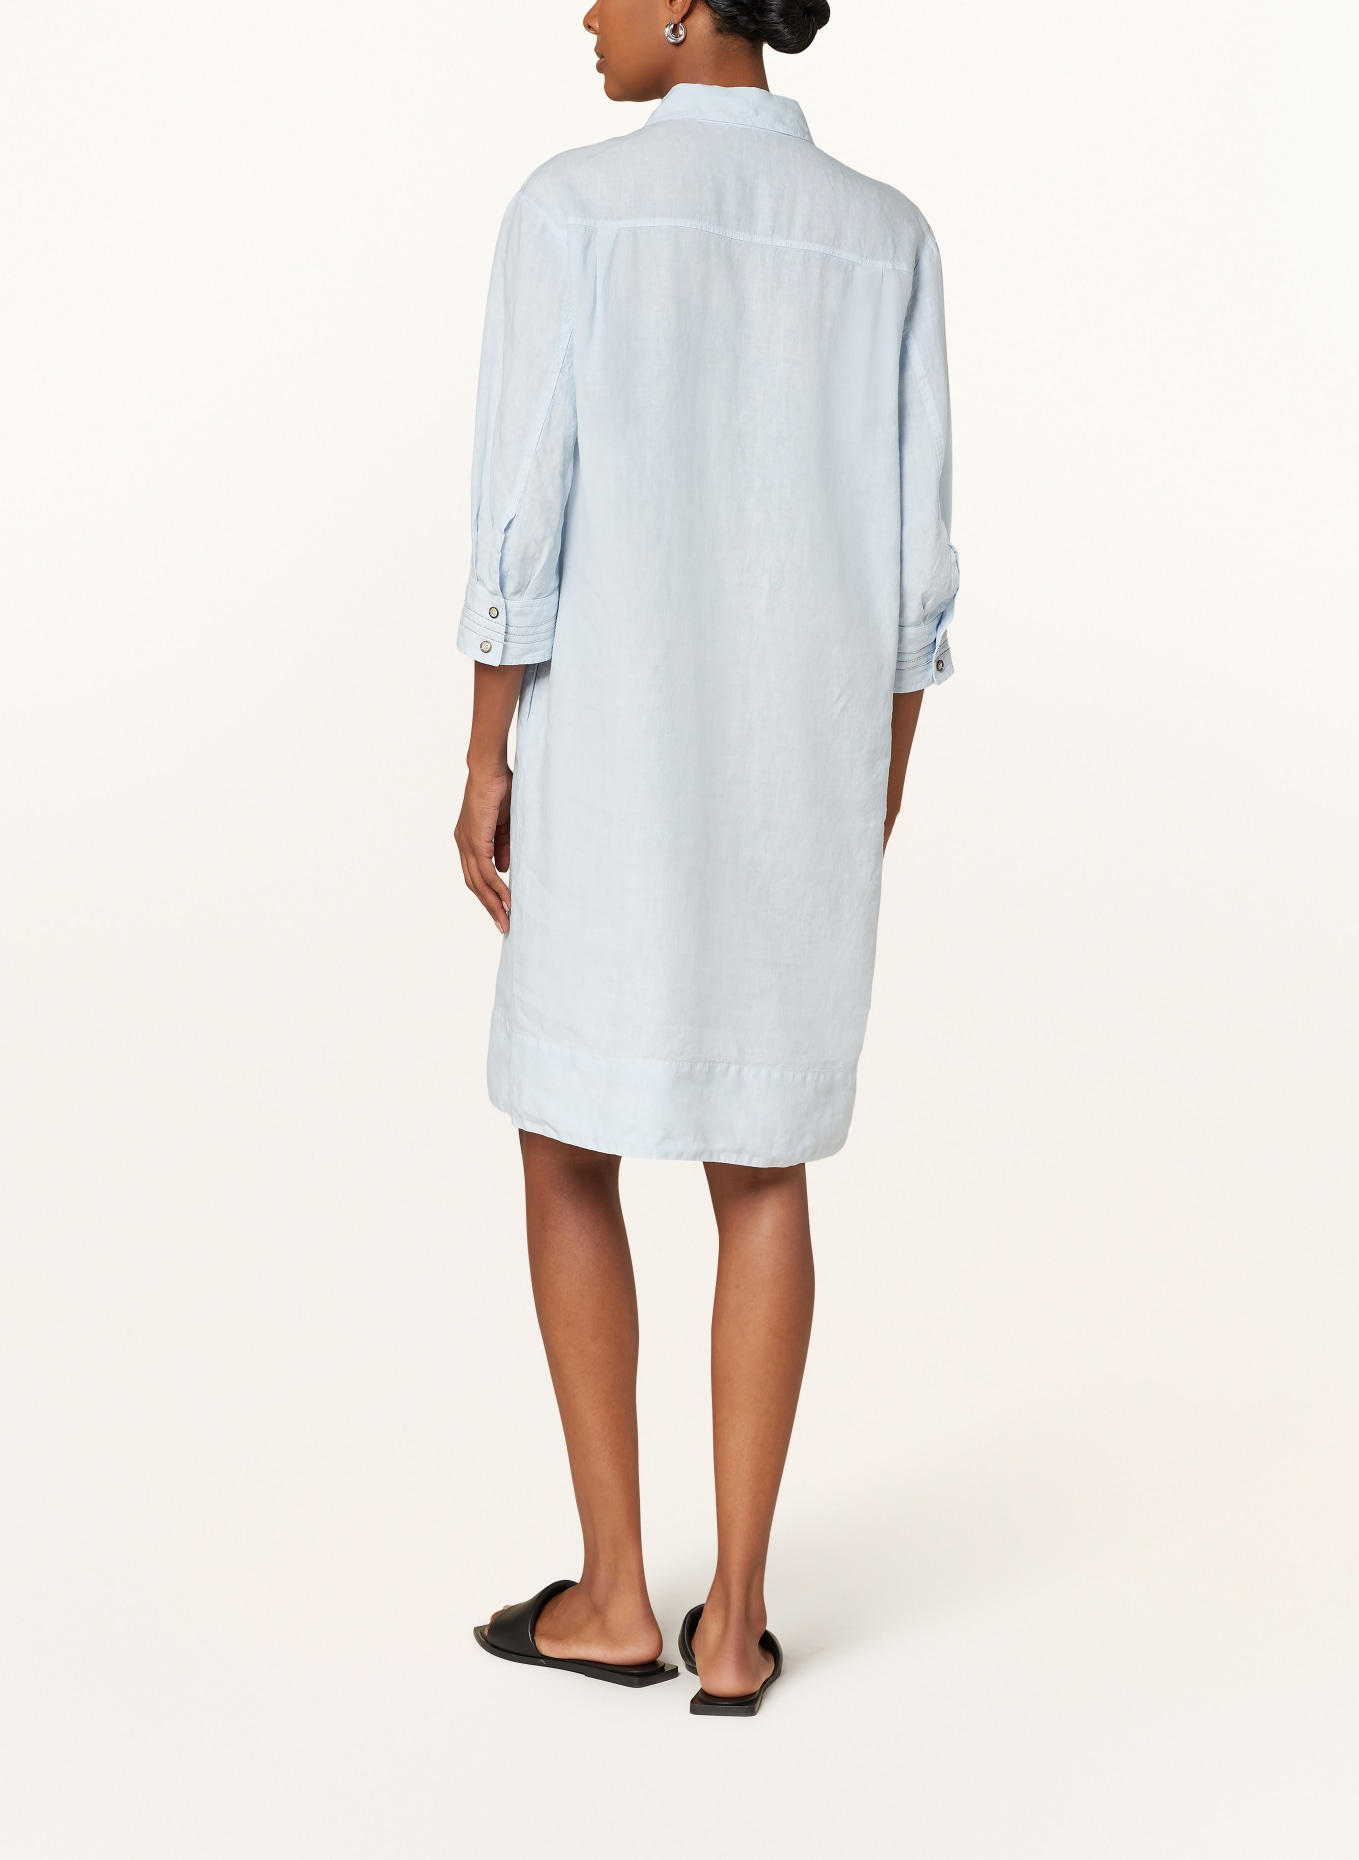 PESERICO Linen dress with 3/4 sleeves, Color: LIGHT BLUE (Image 3)